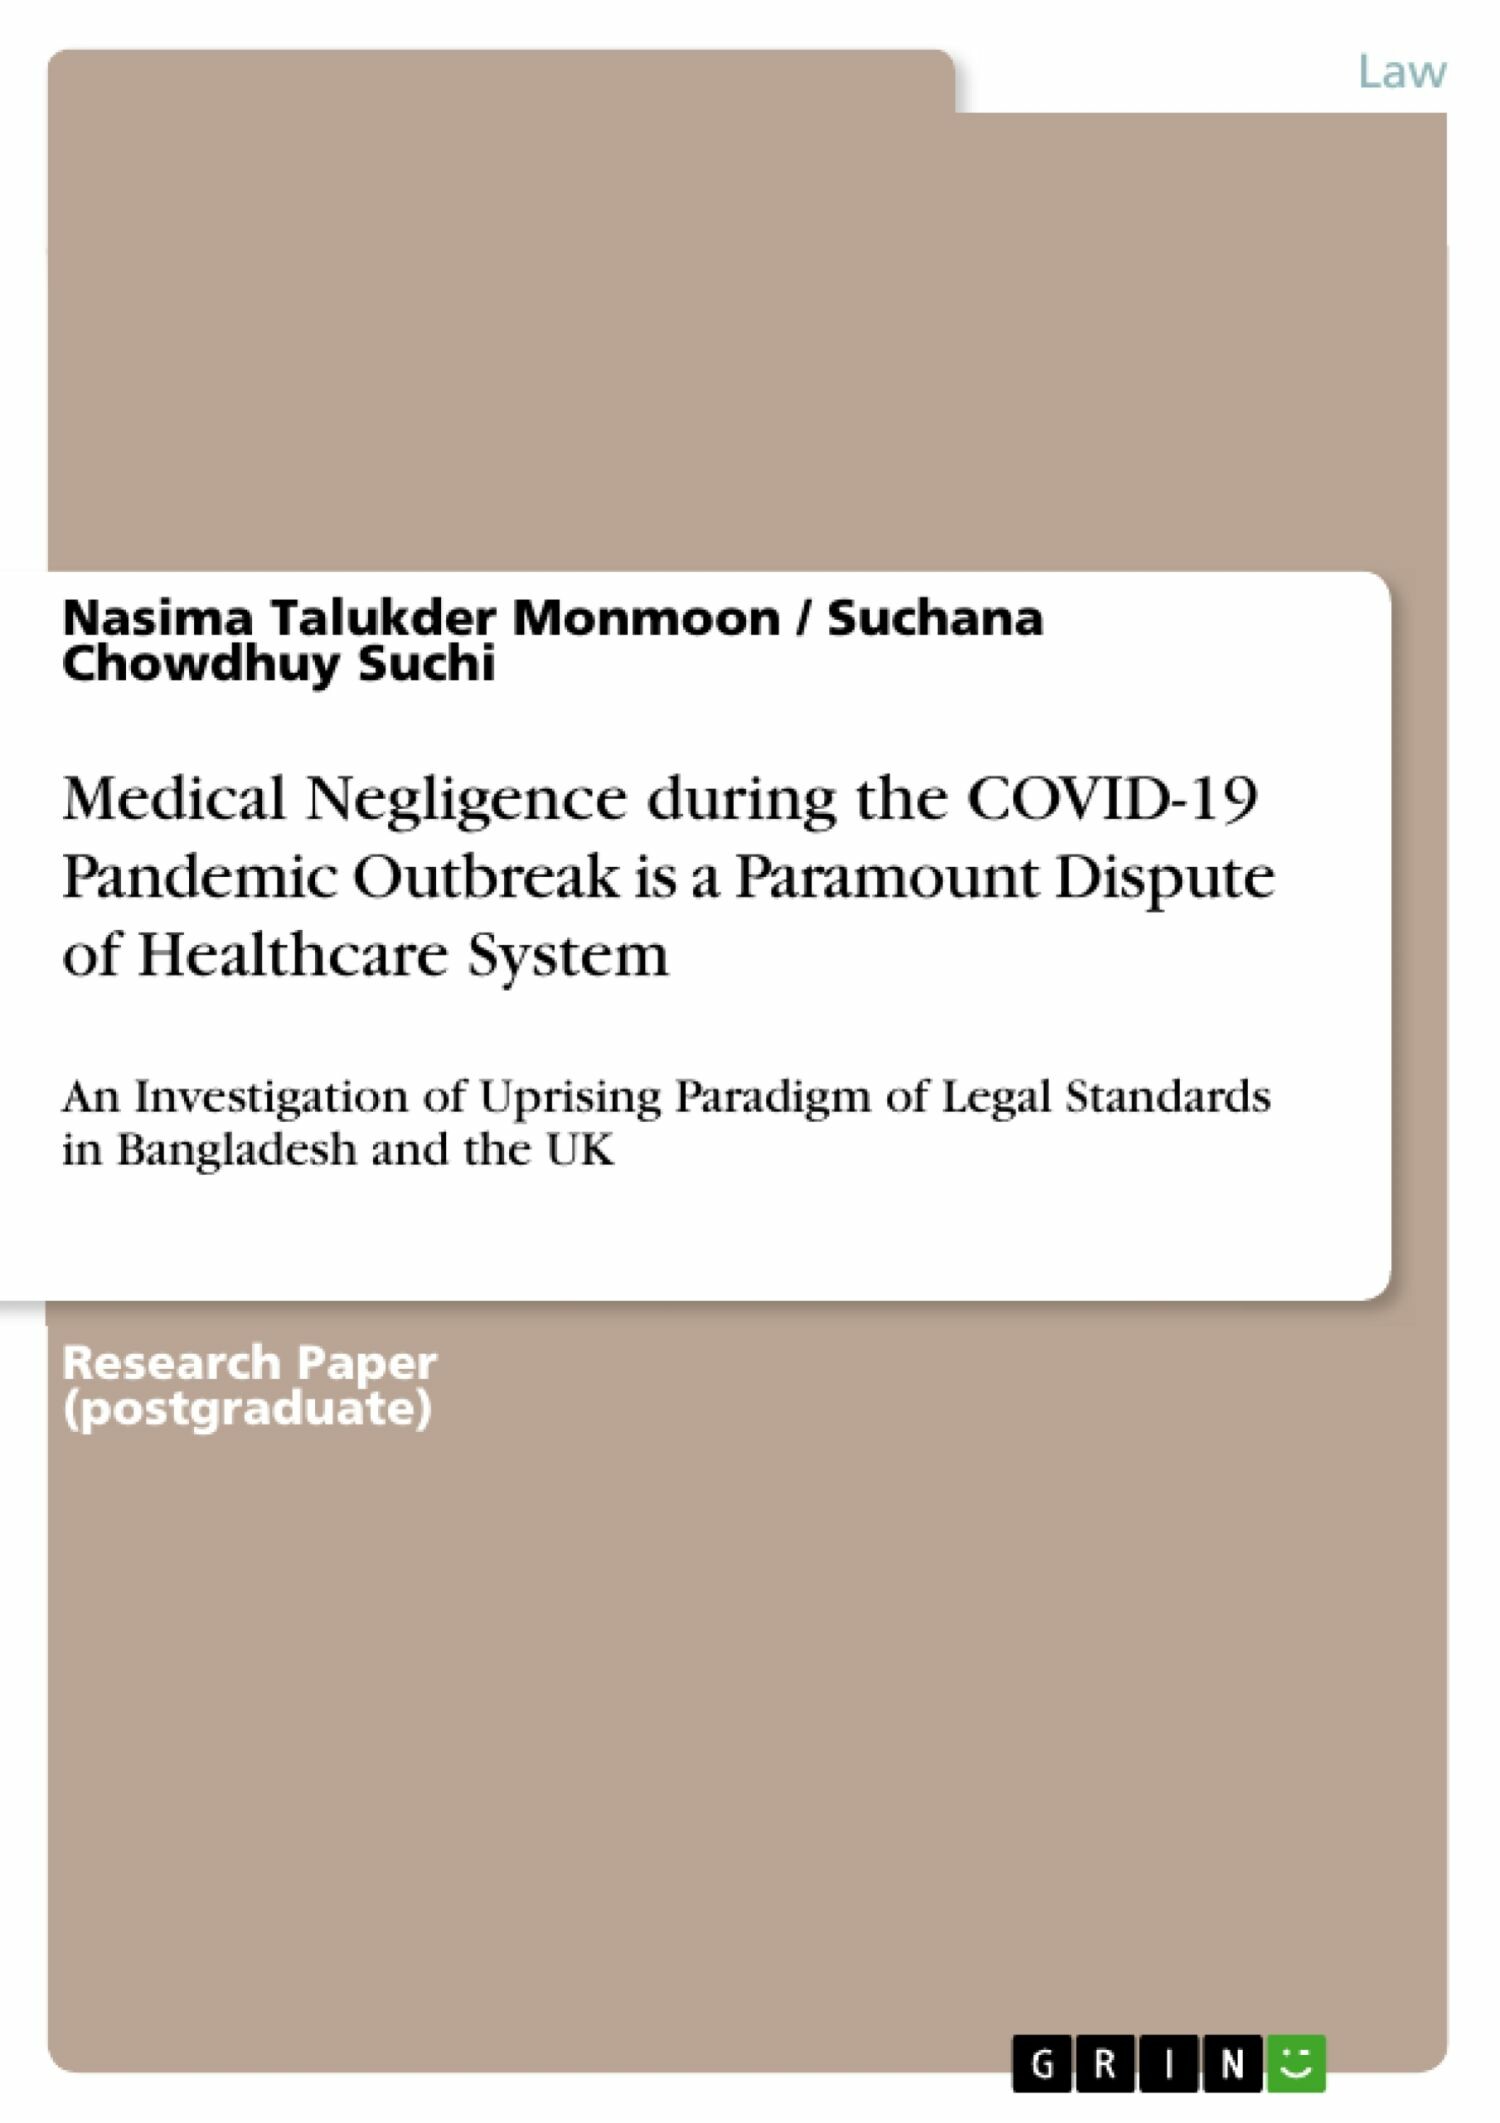 Medical Negligence during the COVID-19 Pandemic Outbreak is a Paramount Dispute of Healthcare System